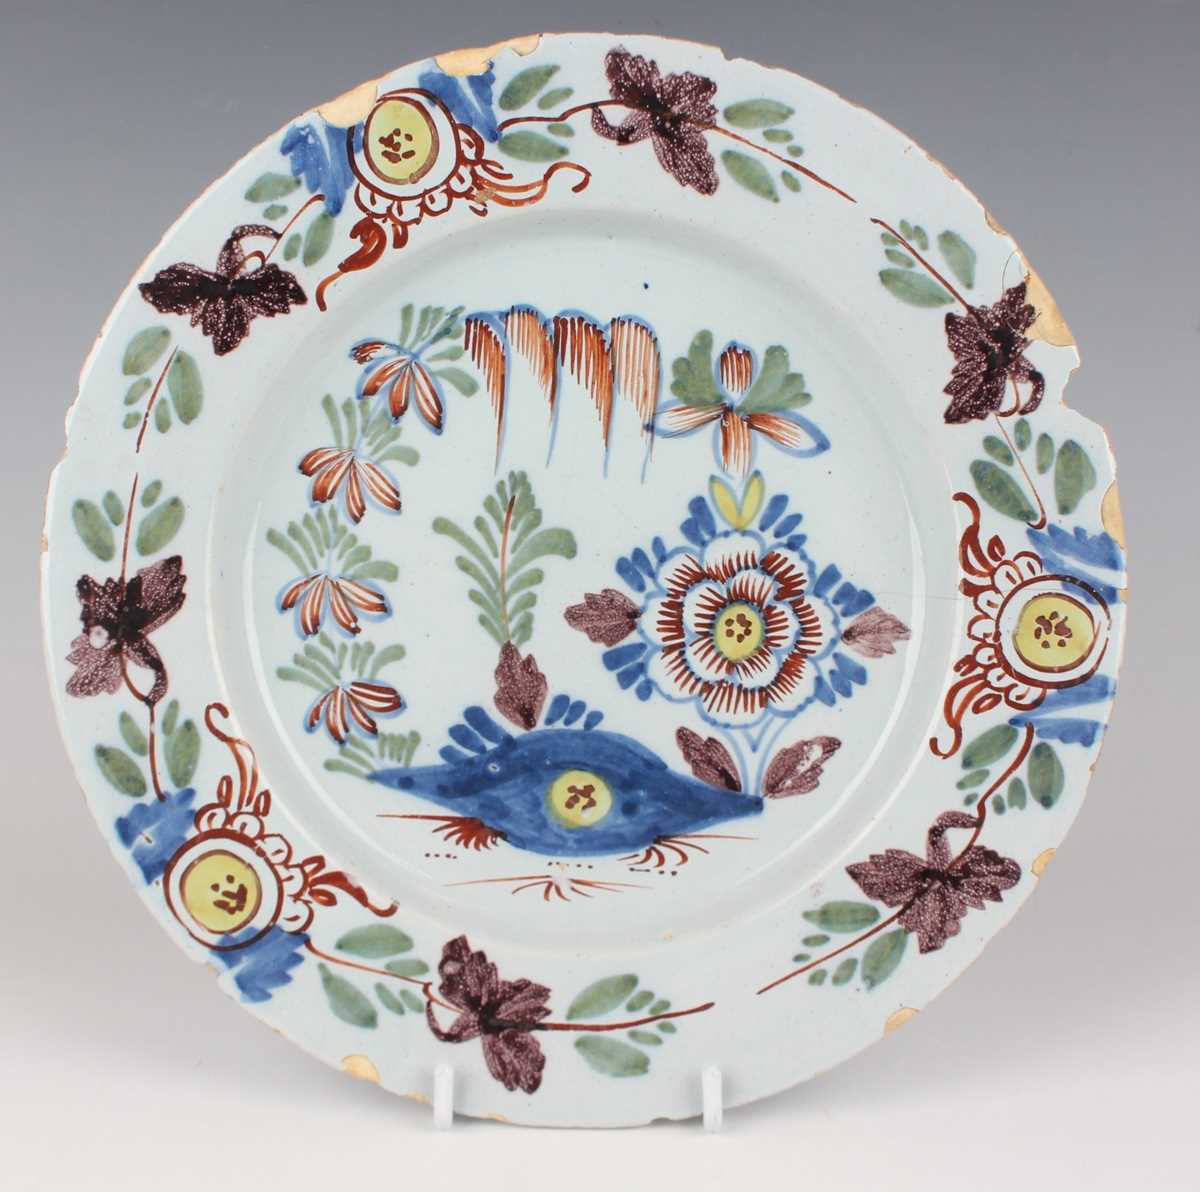 An English delft plate, Lambeth, circa 1770-85, painted in blue, green and manganese with a windmill - Image 7 of 23